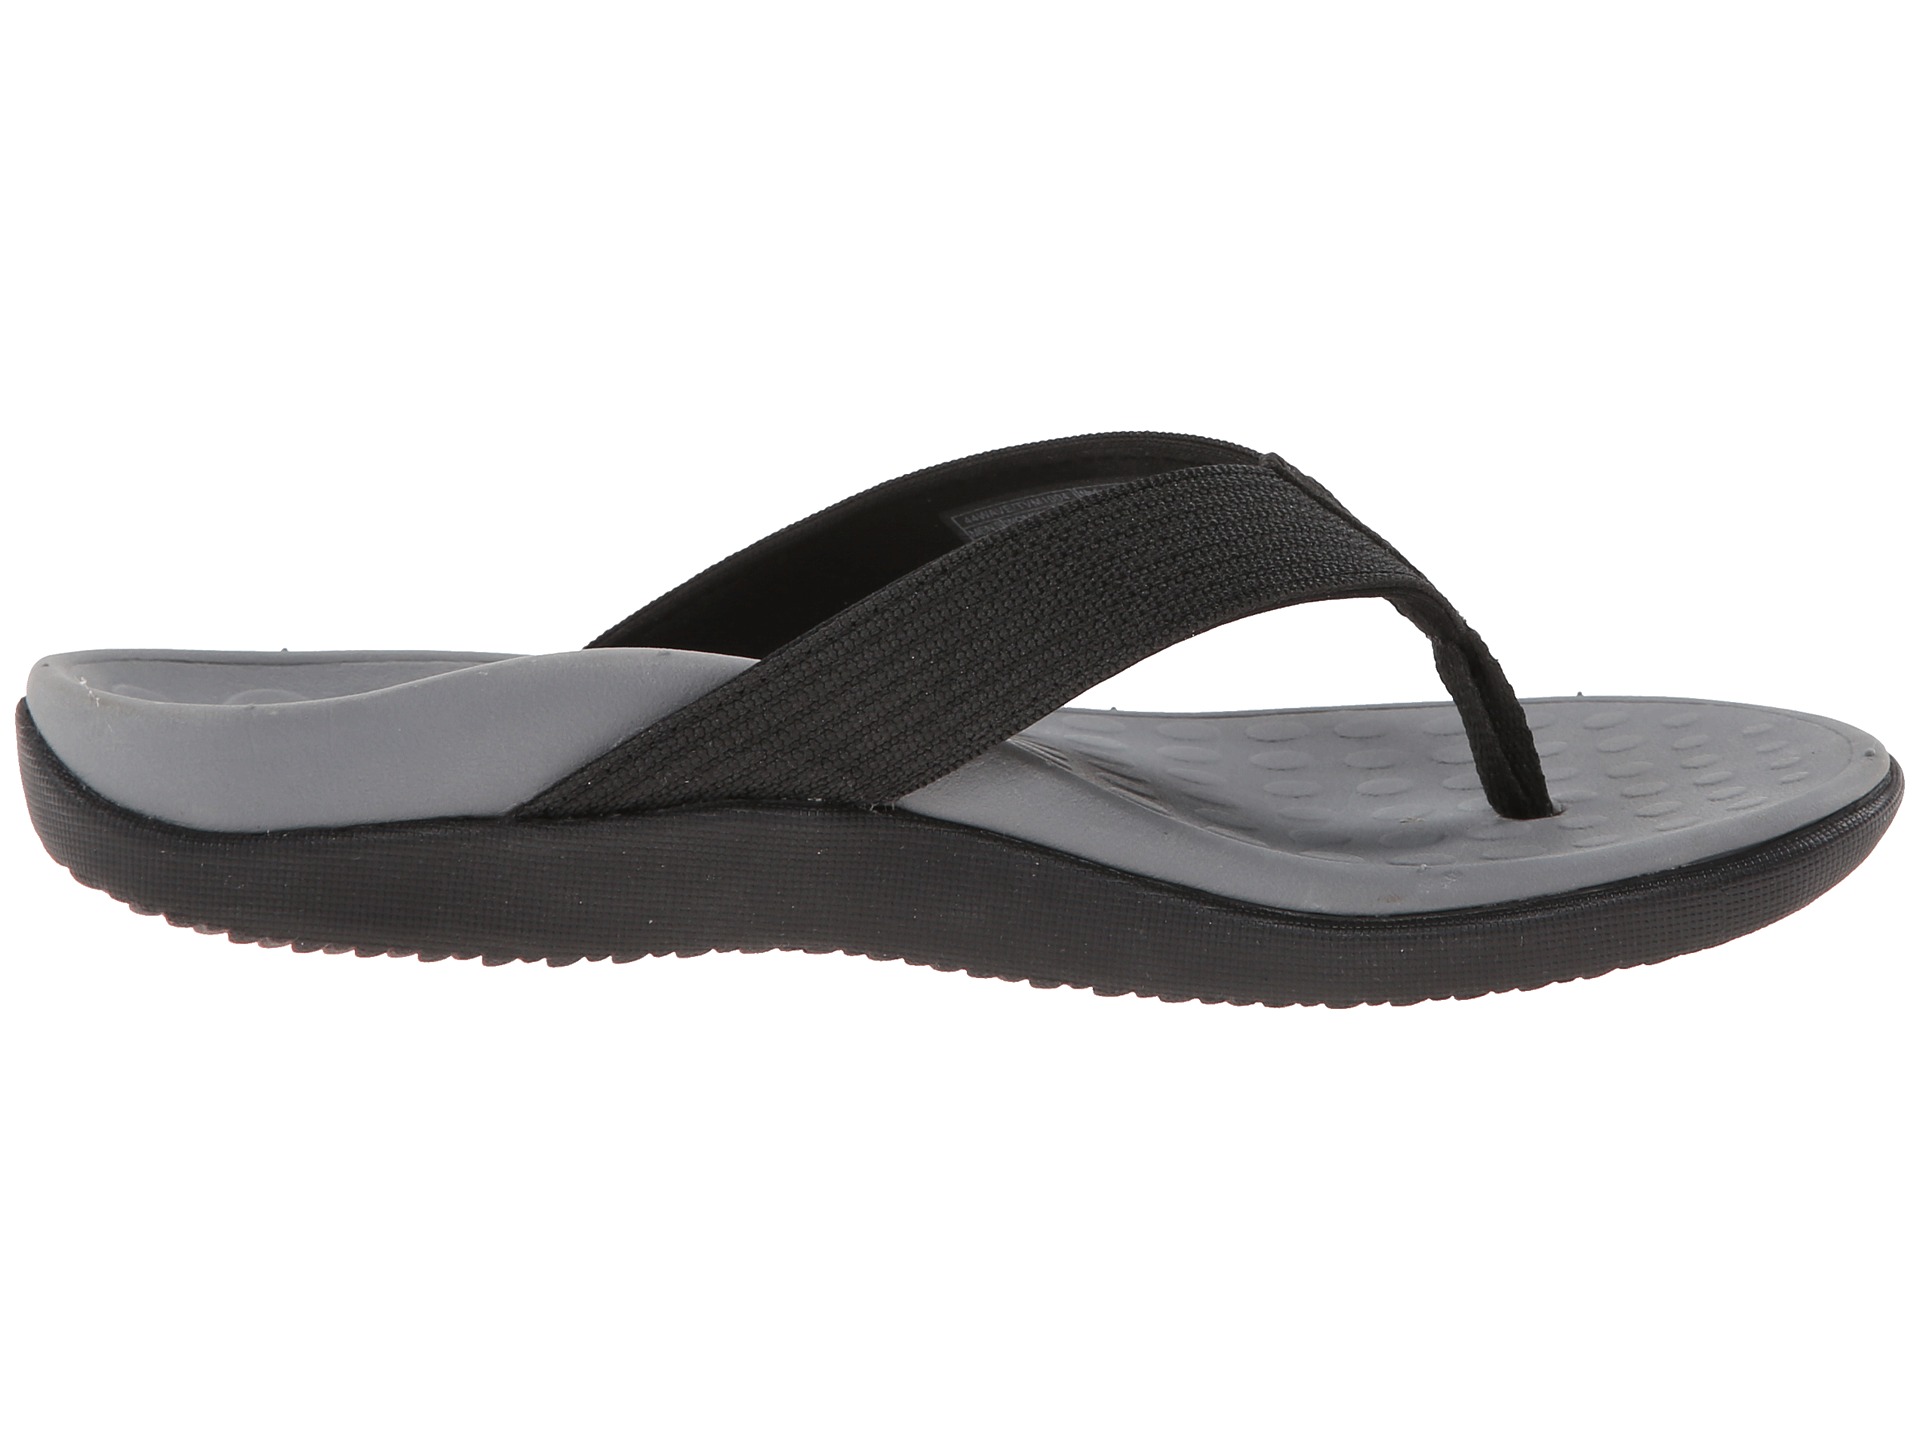 VIONIC with Orthaheel Technology Wave Sandal Black - Zappos.com Free ...